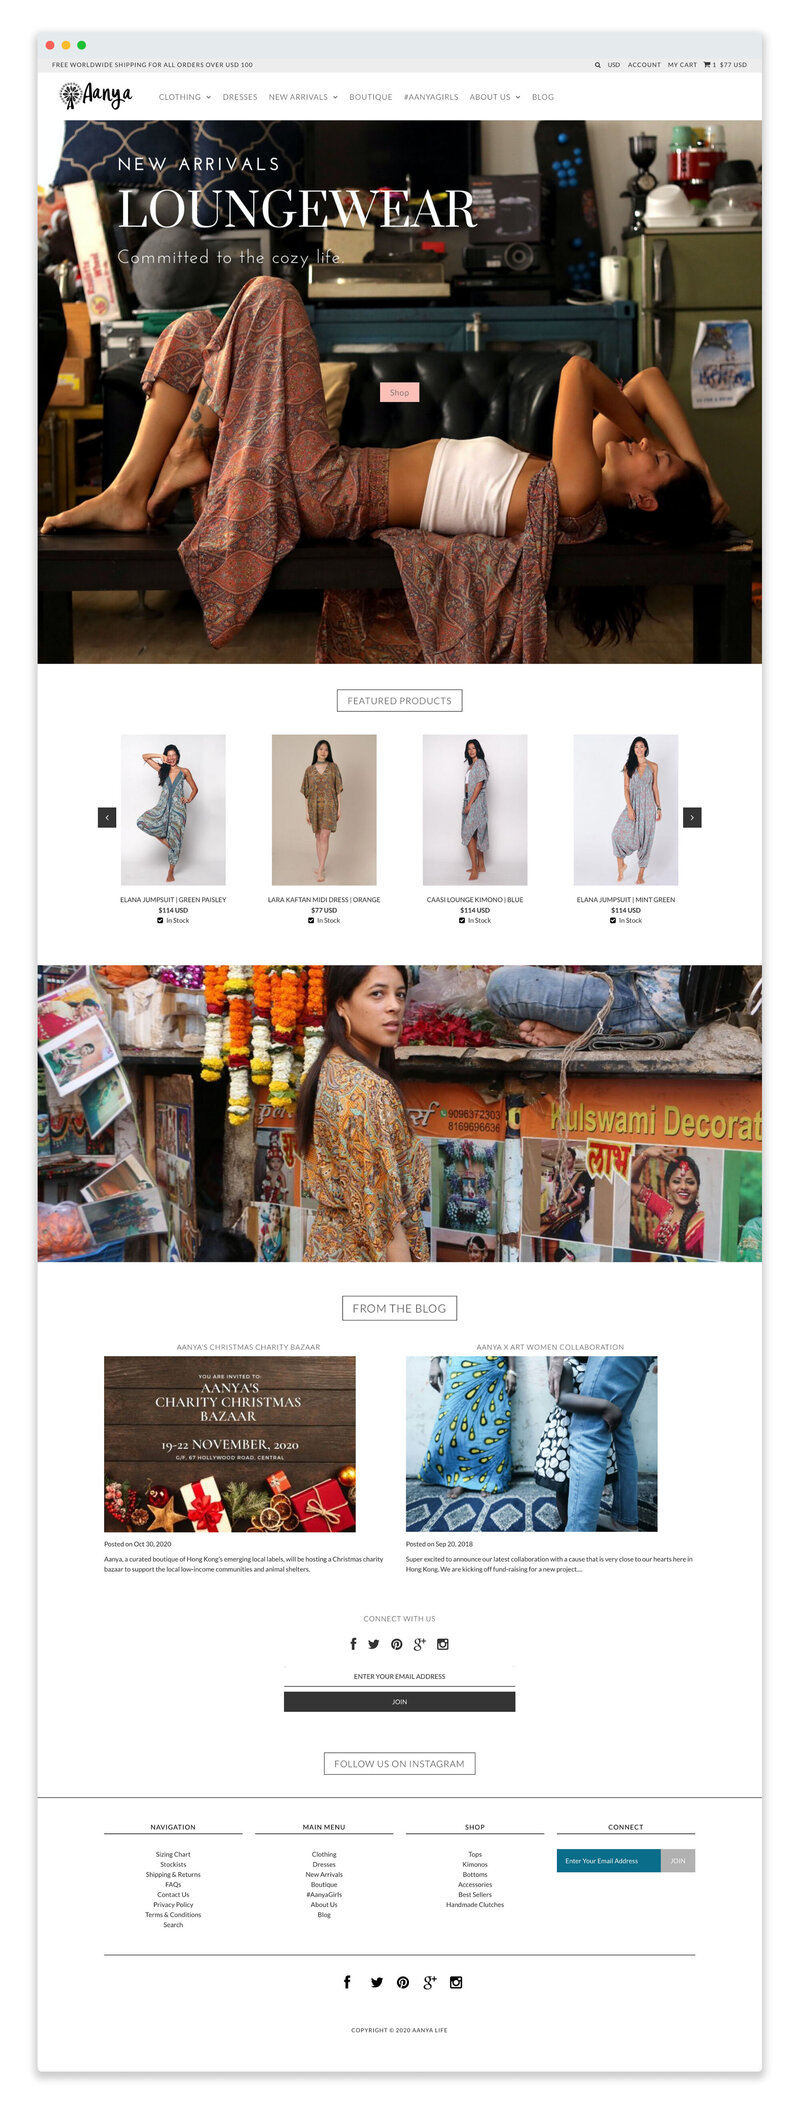 E-Commerce Website Design Service for Fashion and Apparel Brands in Hong Kong - Kyra Janelle’s Web Redesign for Aanya.